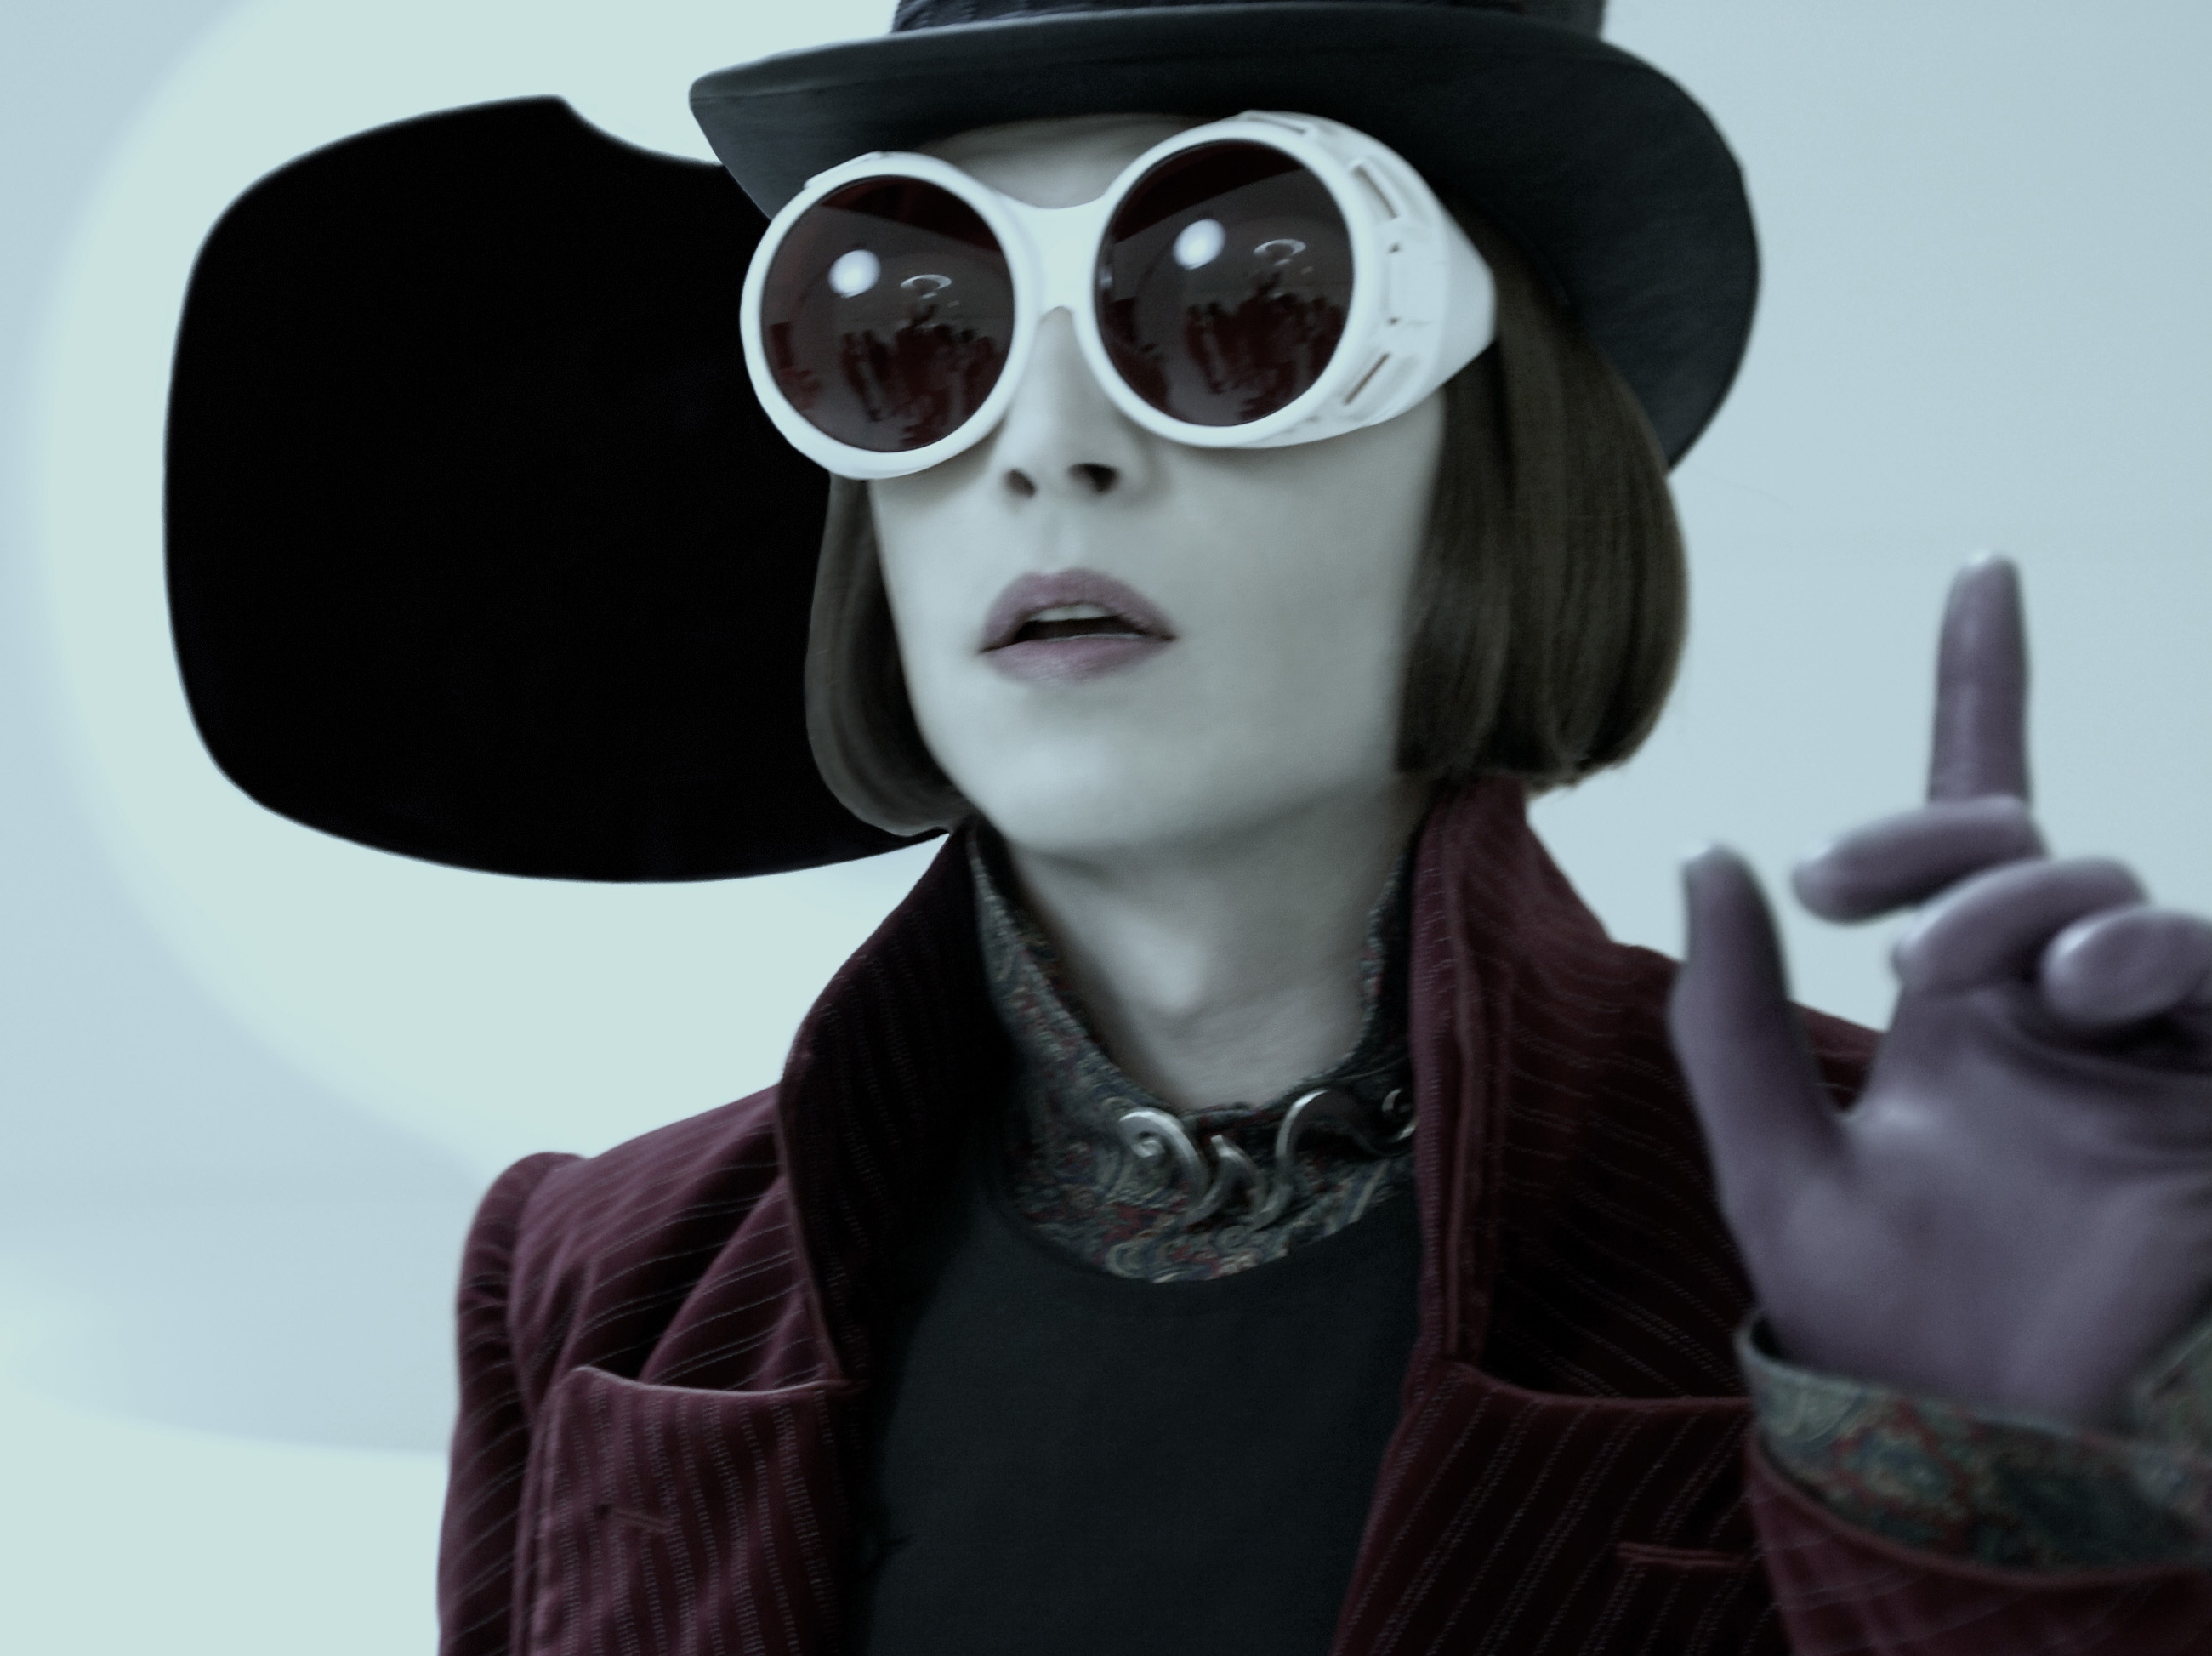 Johnny Depp's take on Willy Wonka in the 2005 film "Charlie a...